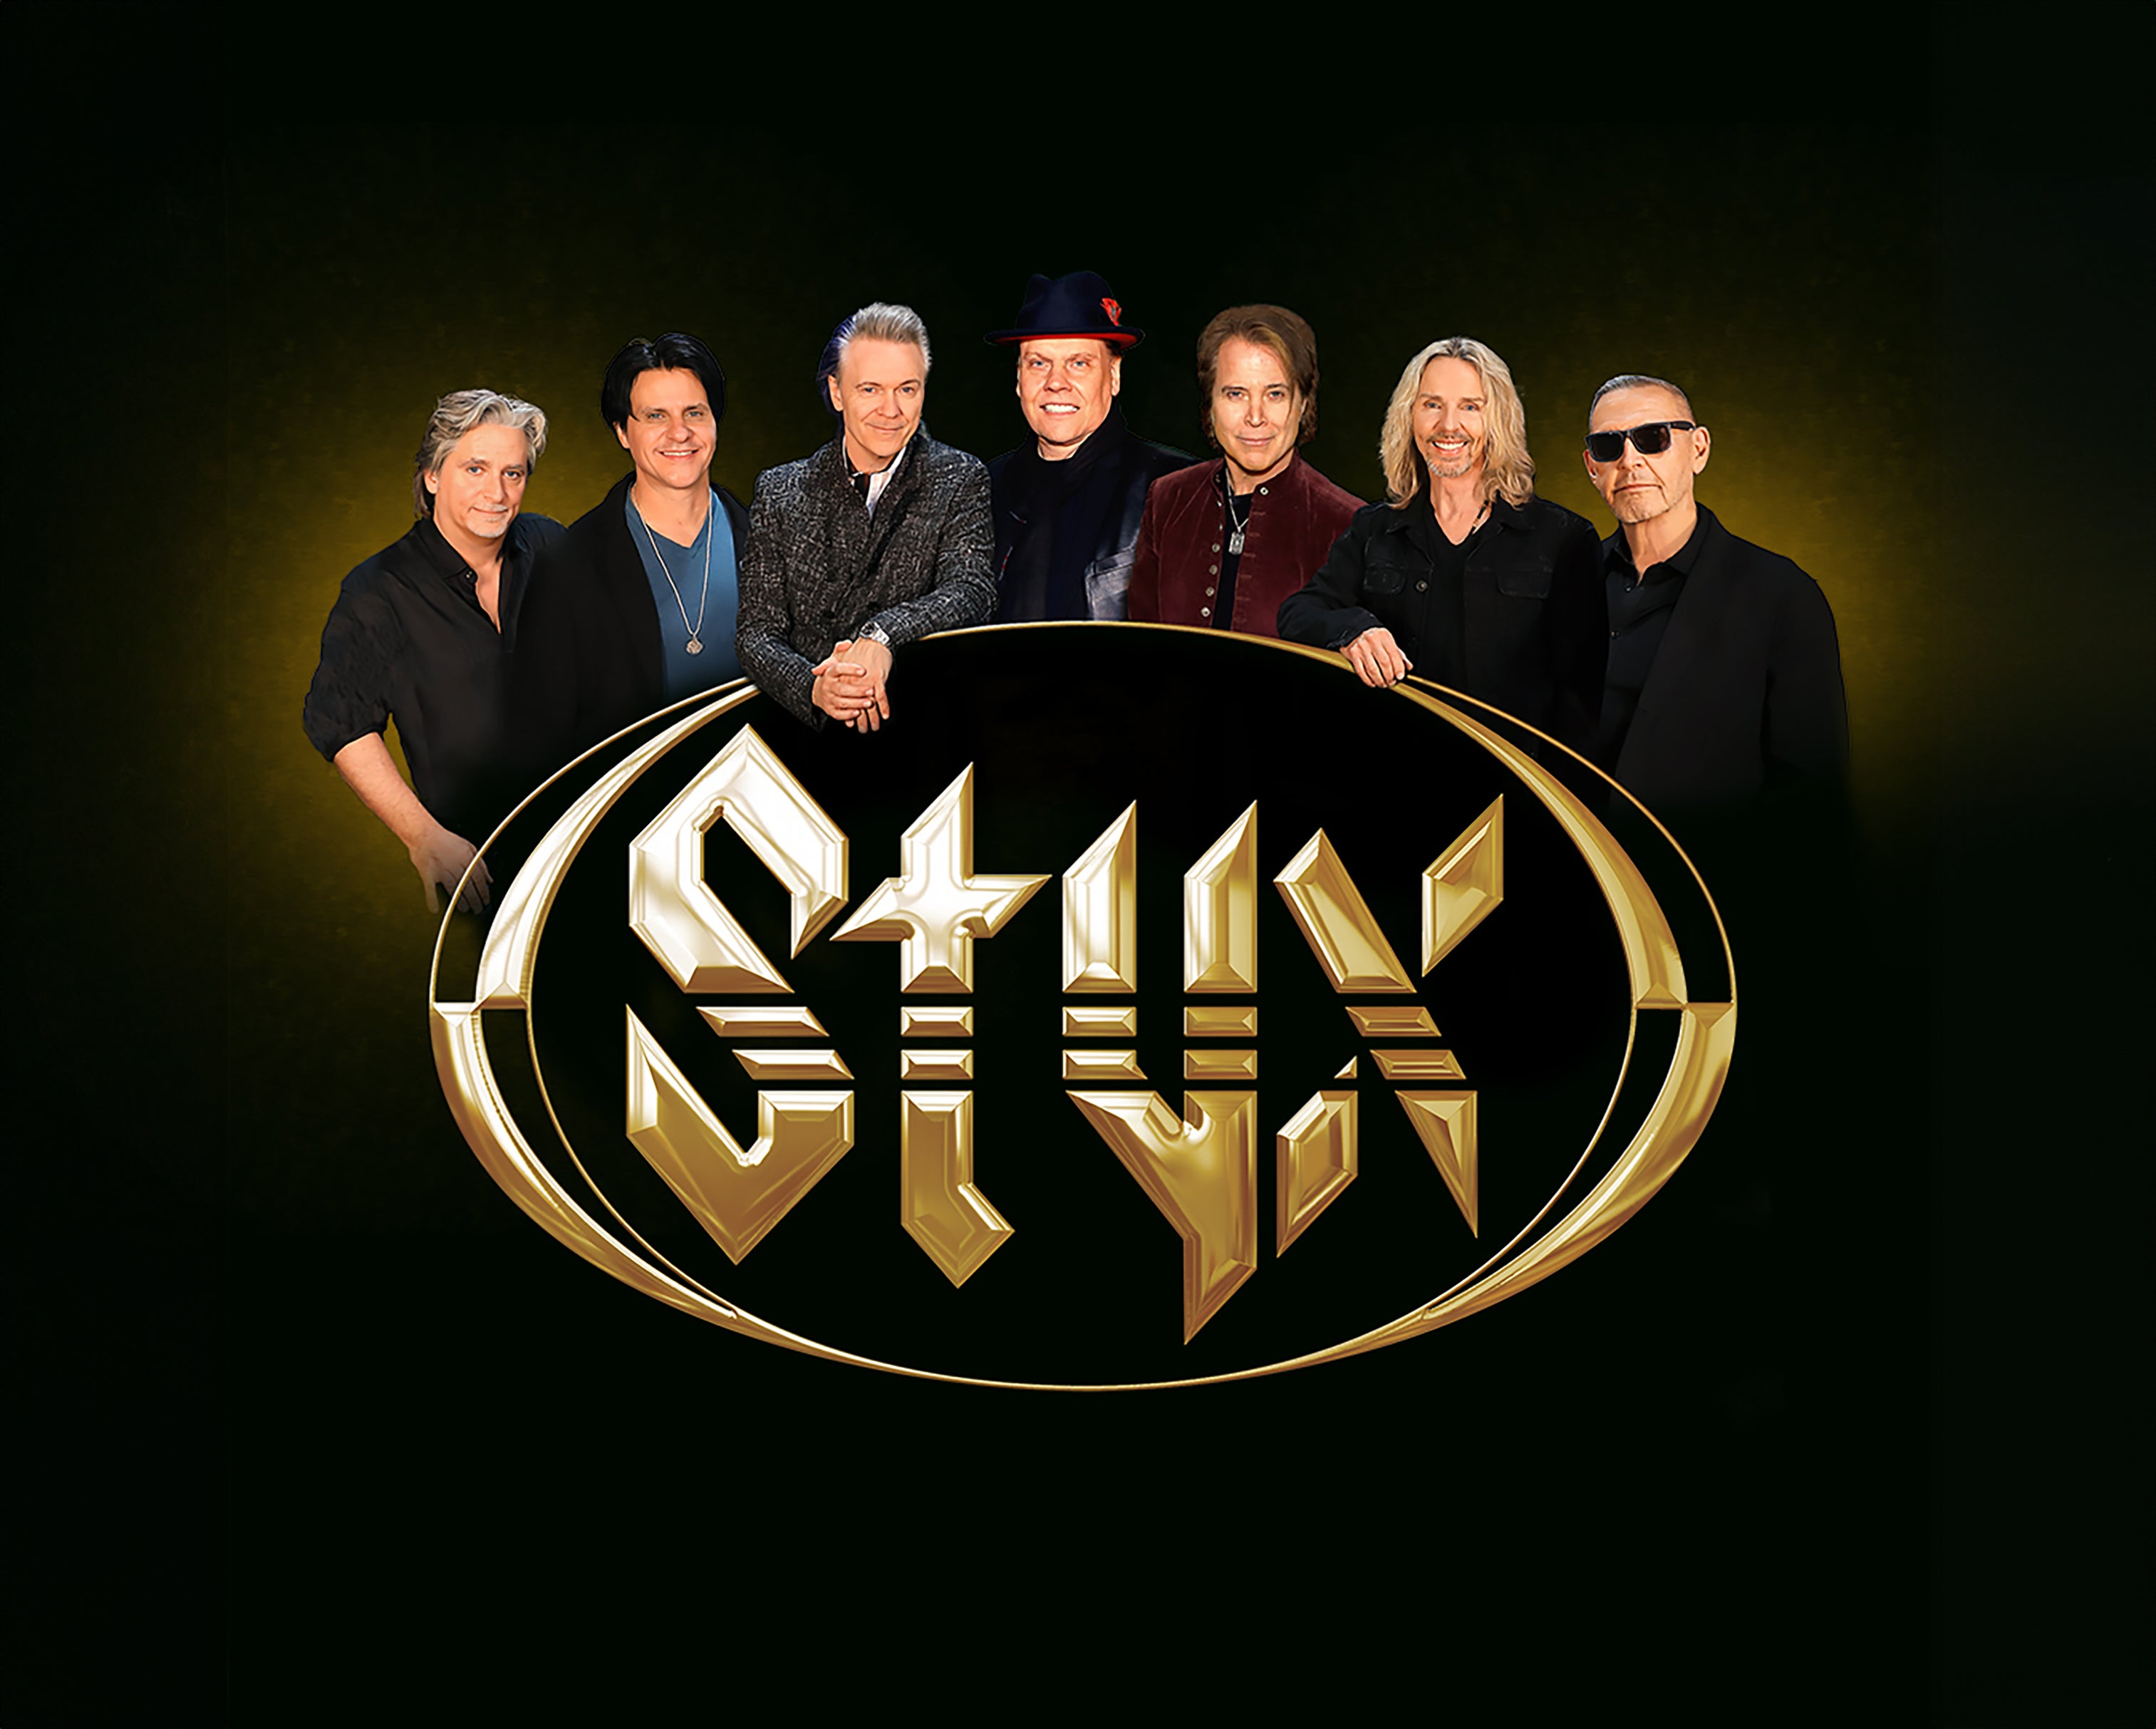 Styx & Foreigner with John Waite - Renegades and Juke Box Heroes Tour presale passwords